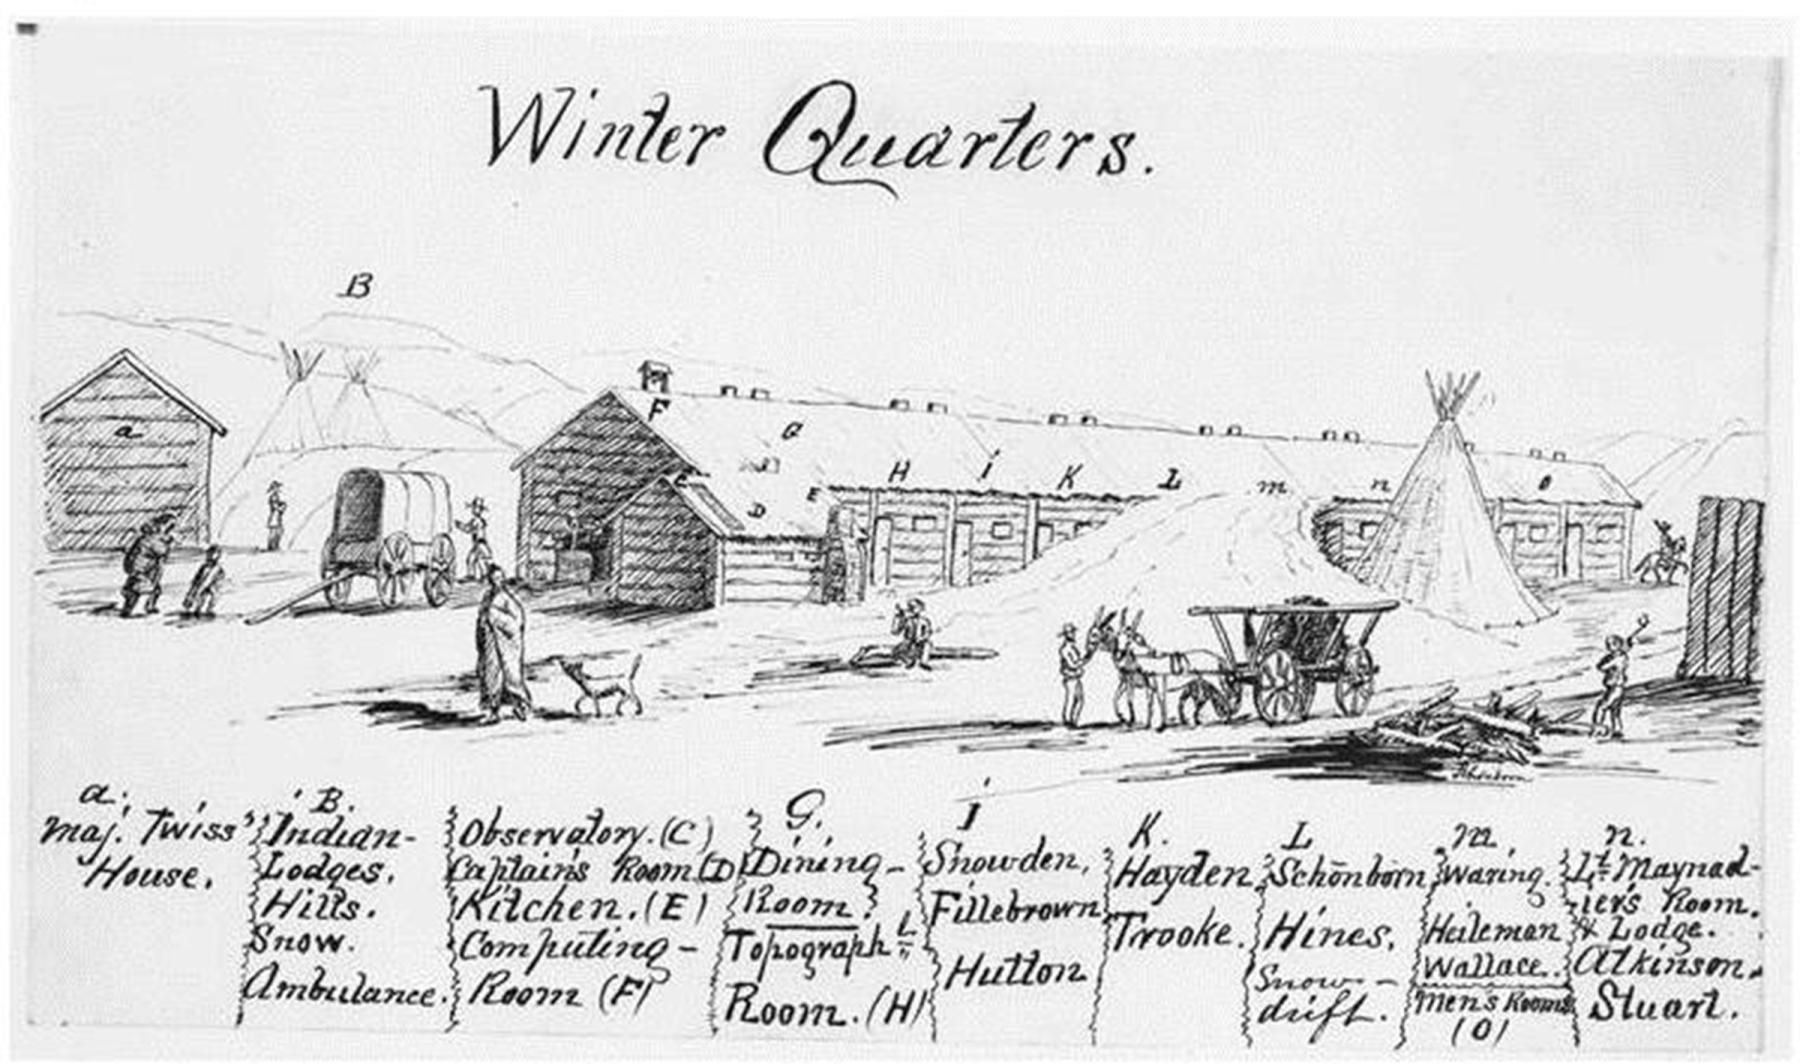 The Raynolds Expedition spent the winter of 1859-60 at Deer Creek. The buildings, sketched here by expedition artist Anton Schönborn, were partially completed earlier by Mormons to support a planned freight line across the West—plans that were scrapped by the so-called Mormon War of 1857-58. American Heritage Center, University of Wyoming.